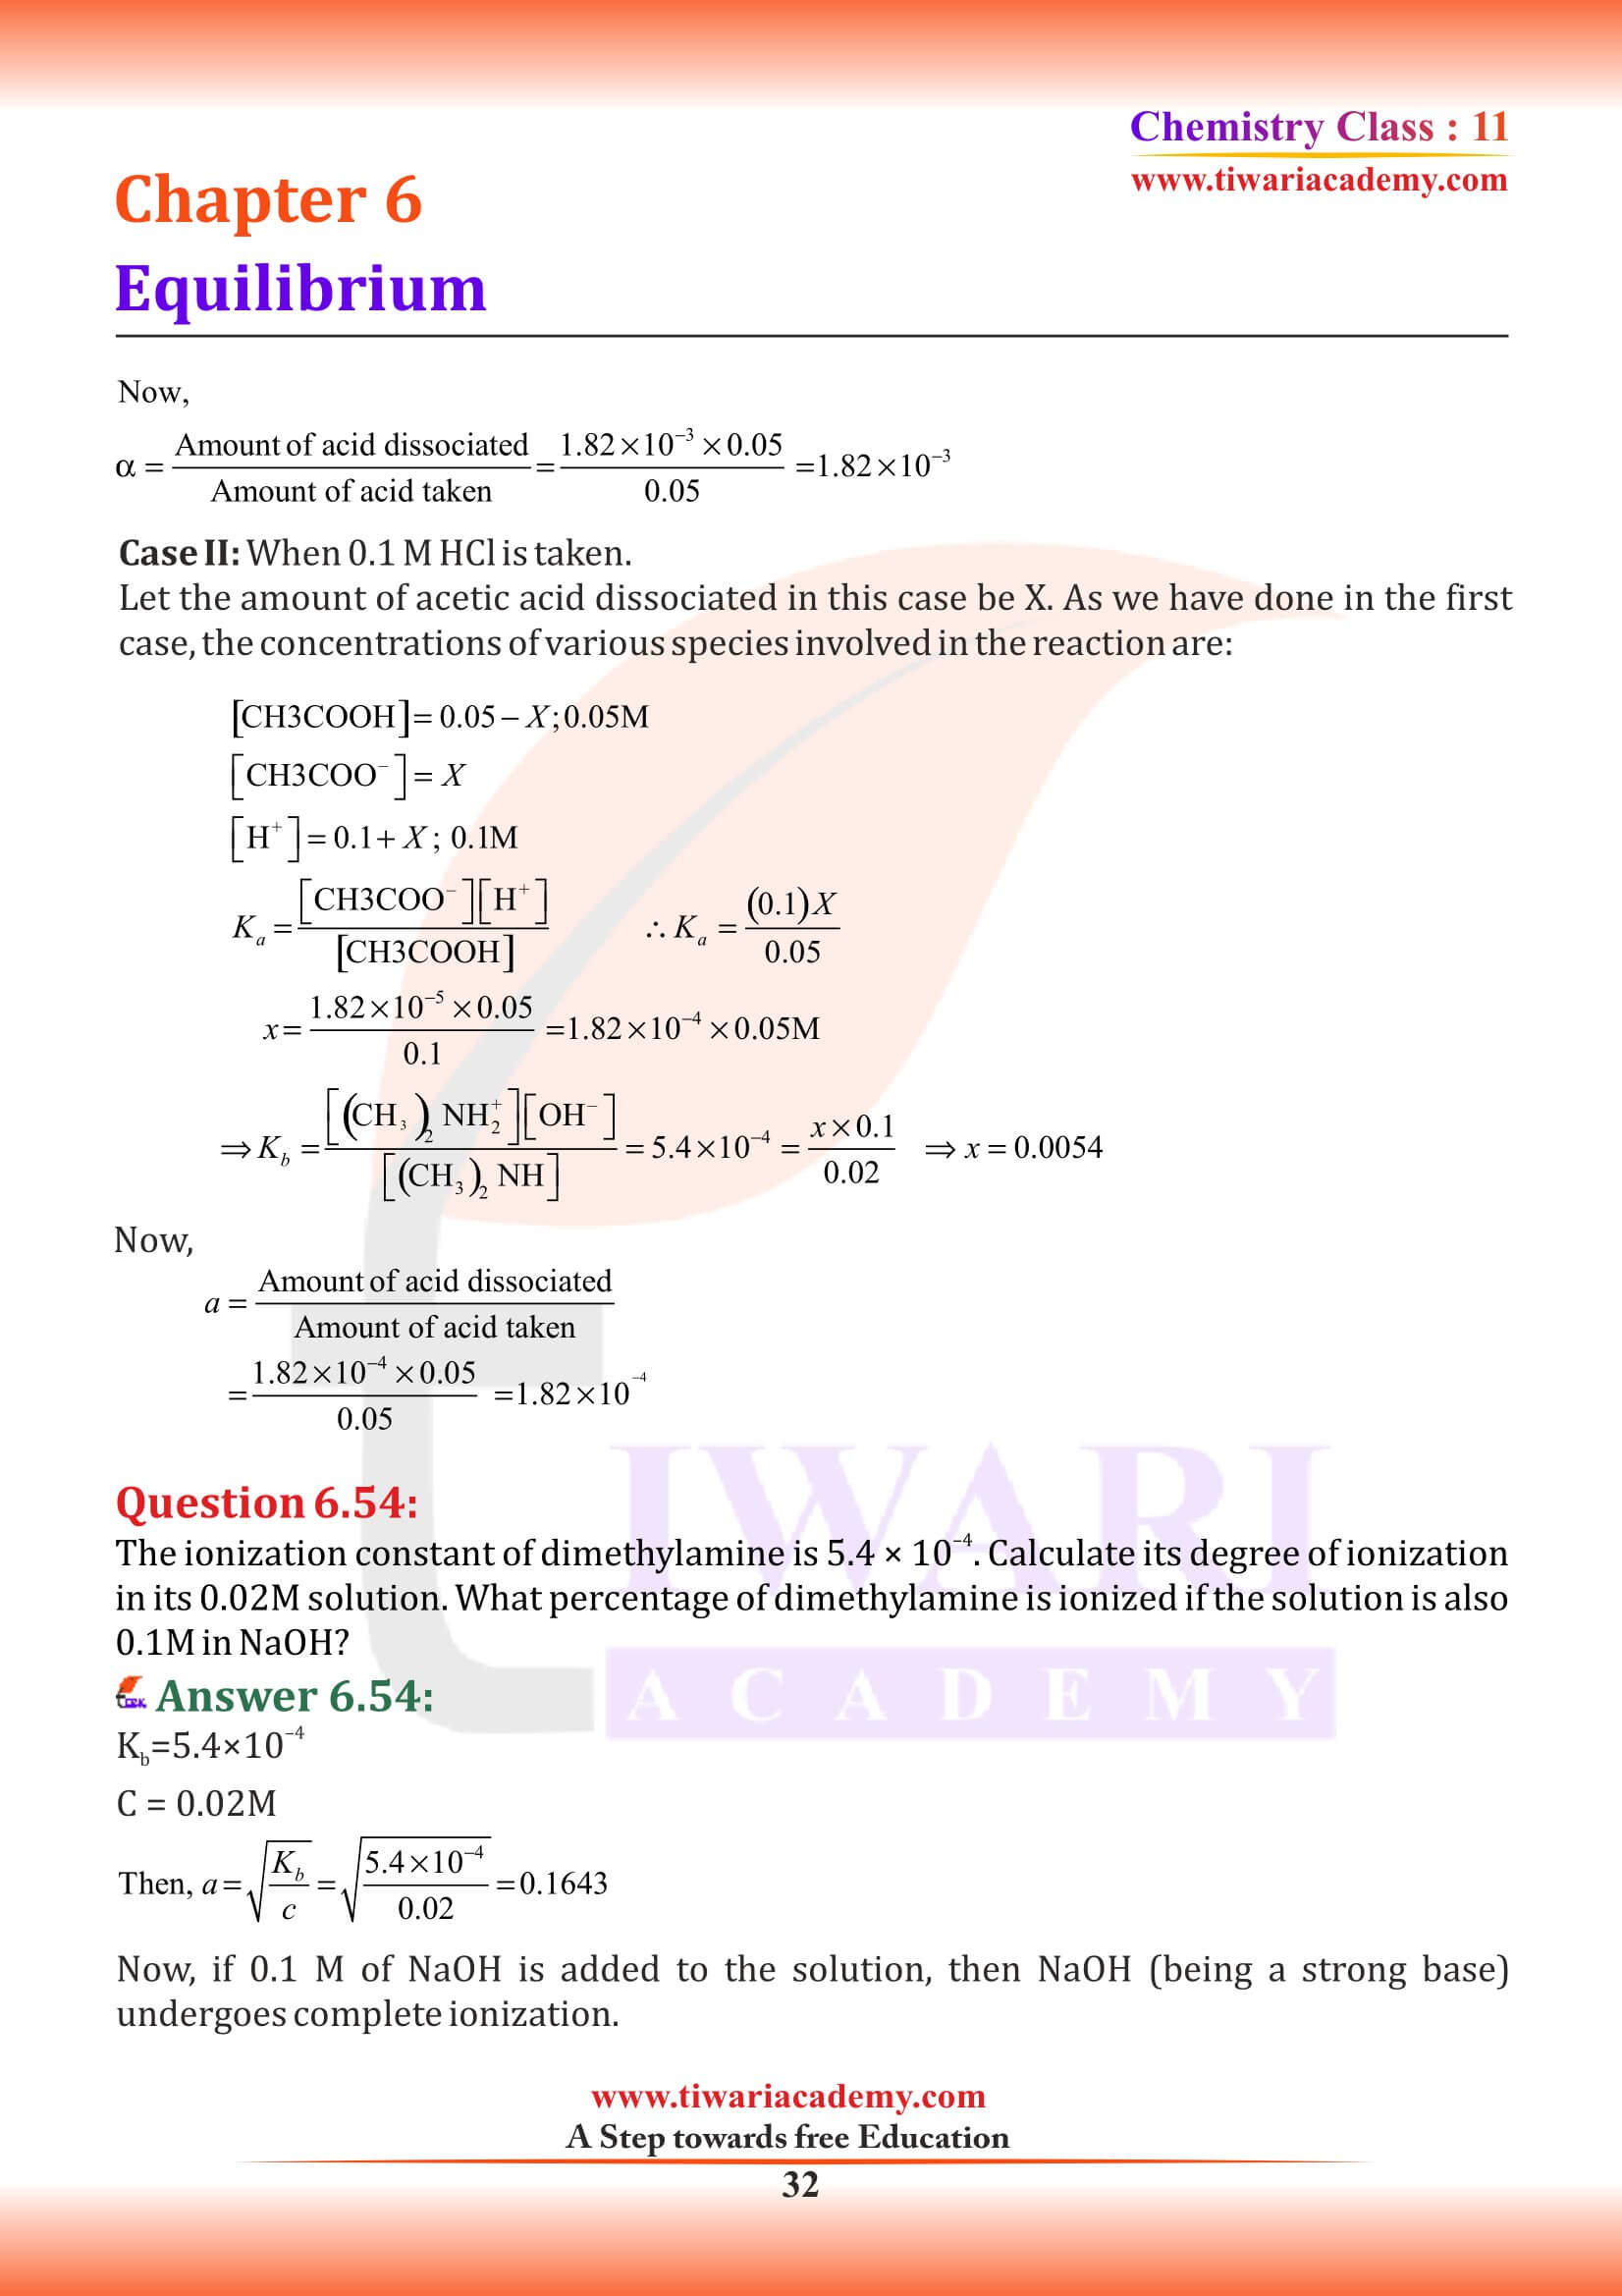 NCERT Class 11 Chemistry Chapter 6 guide